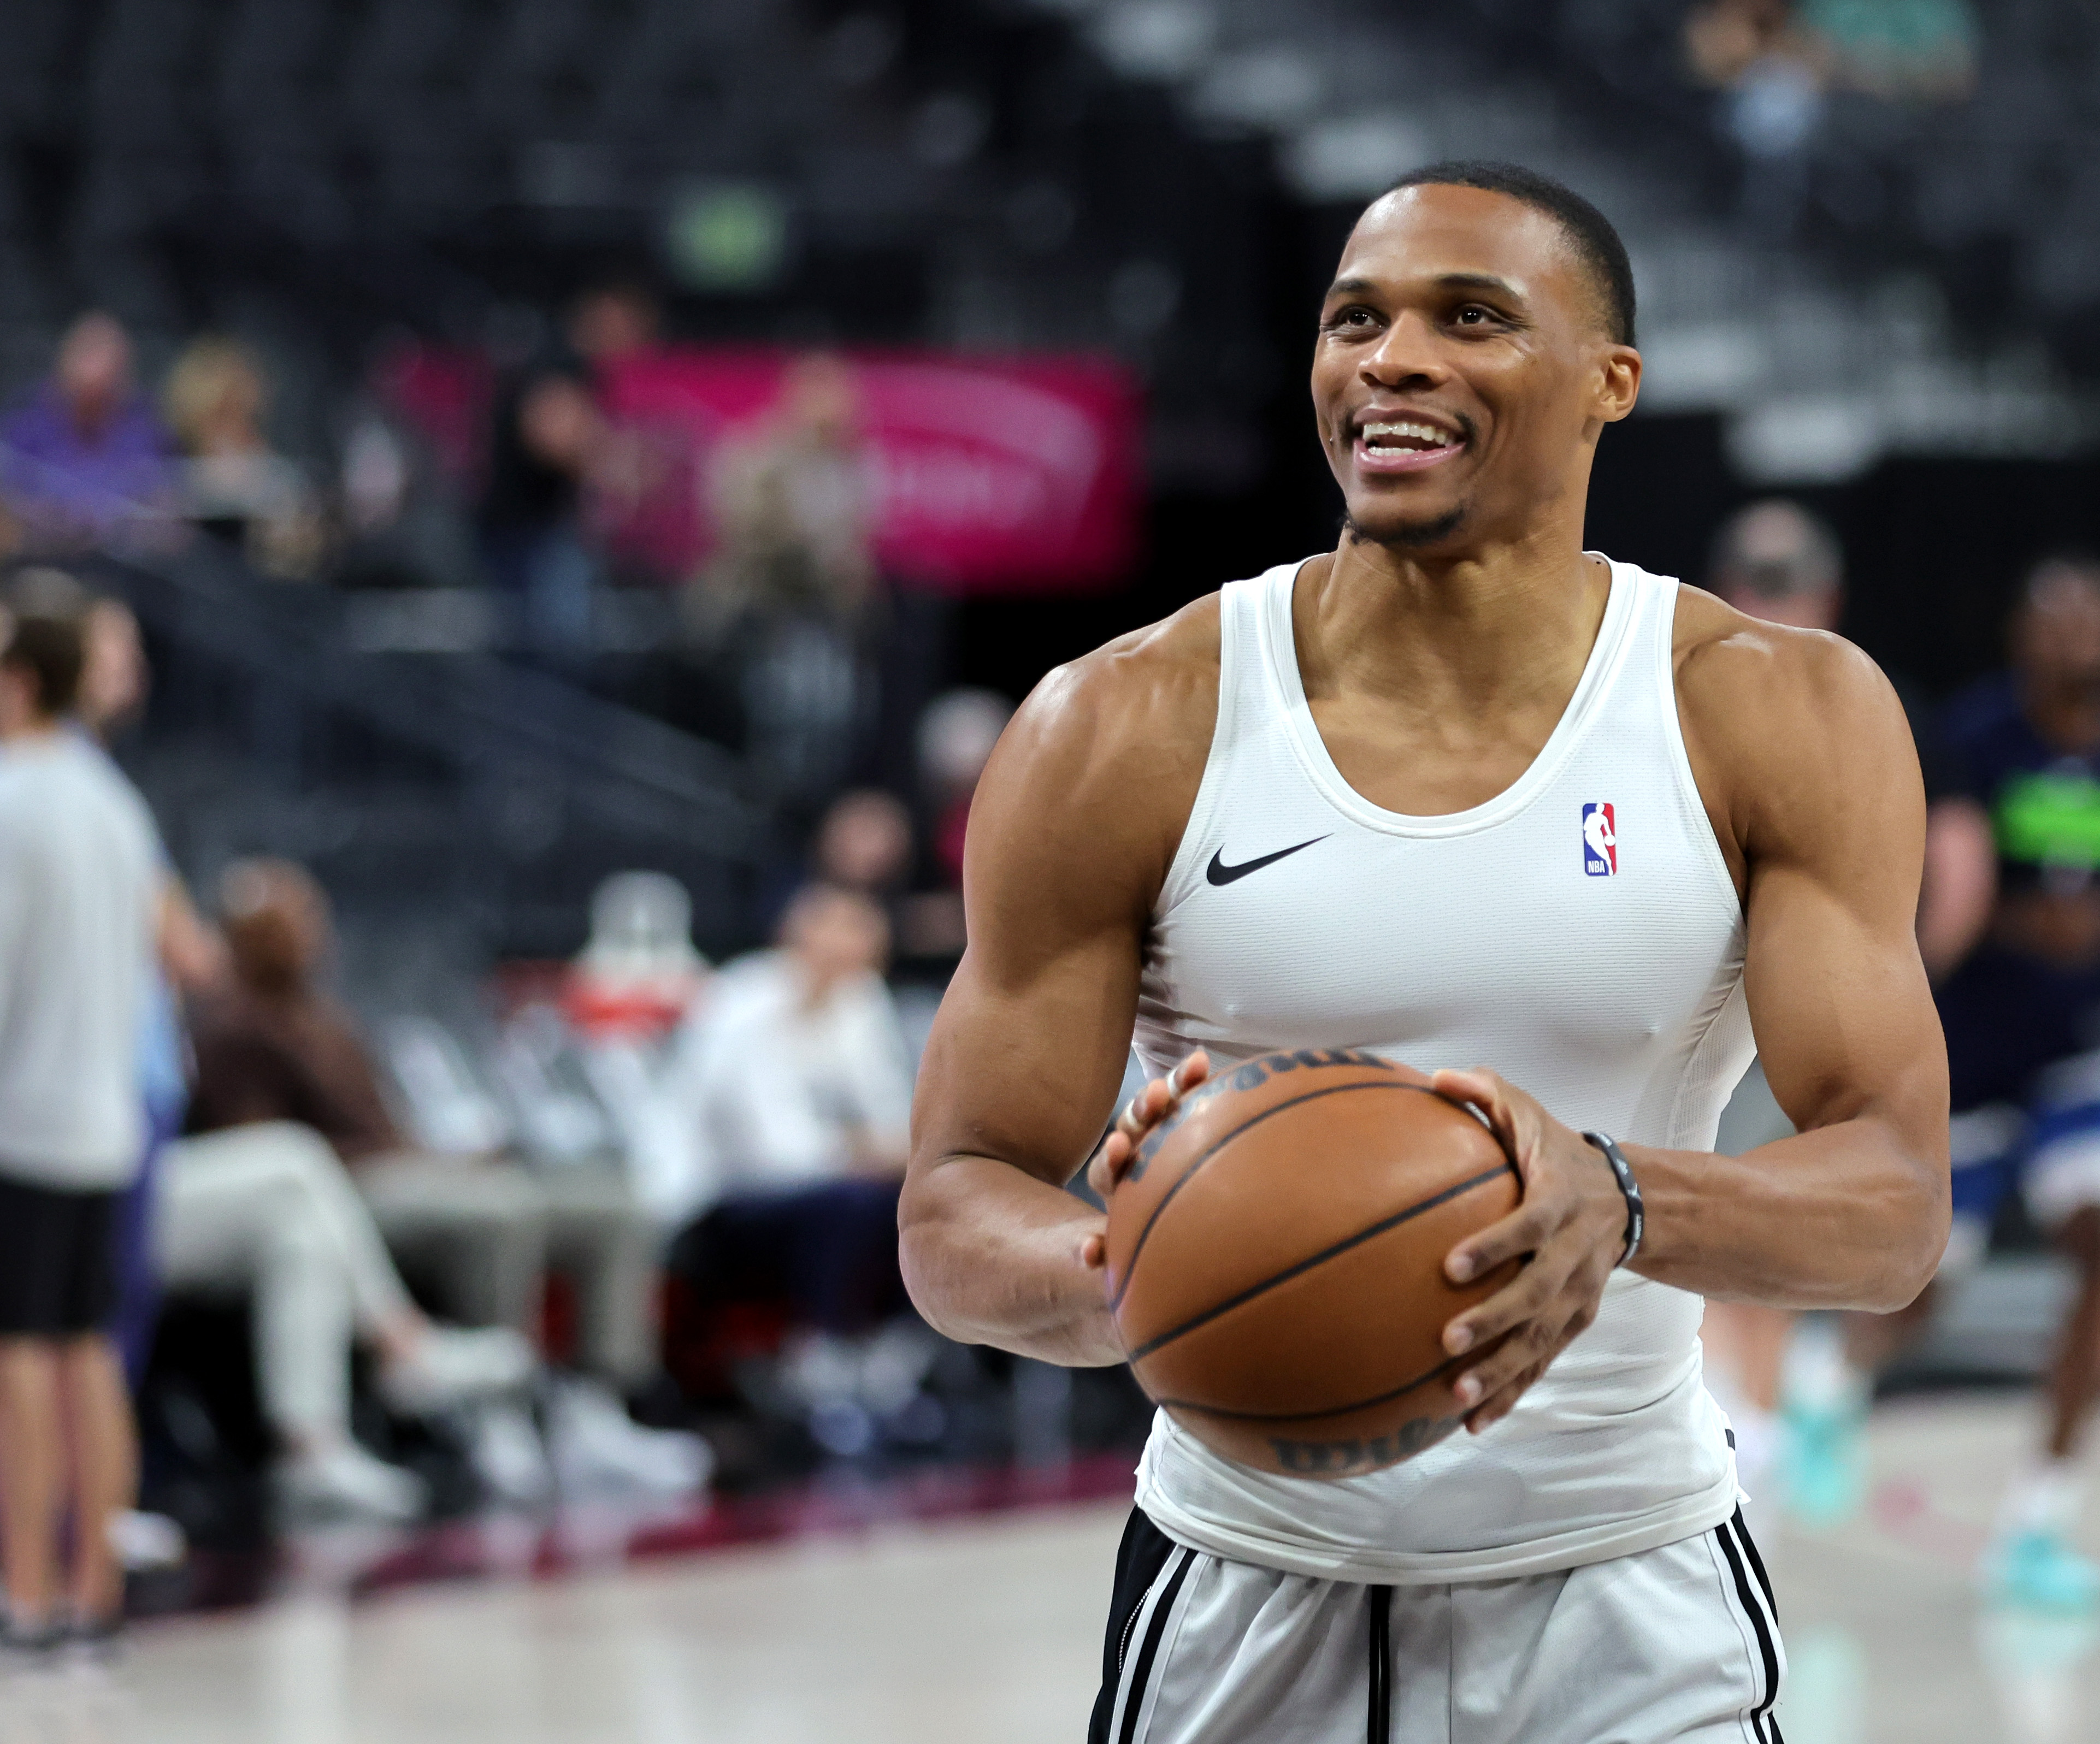 Russell Westbrook's 'strengths, desire' to fit revealed amid